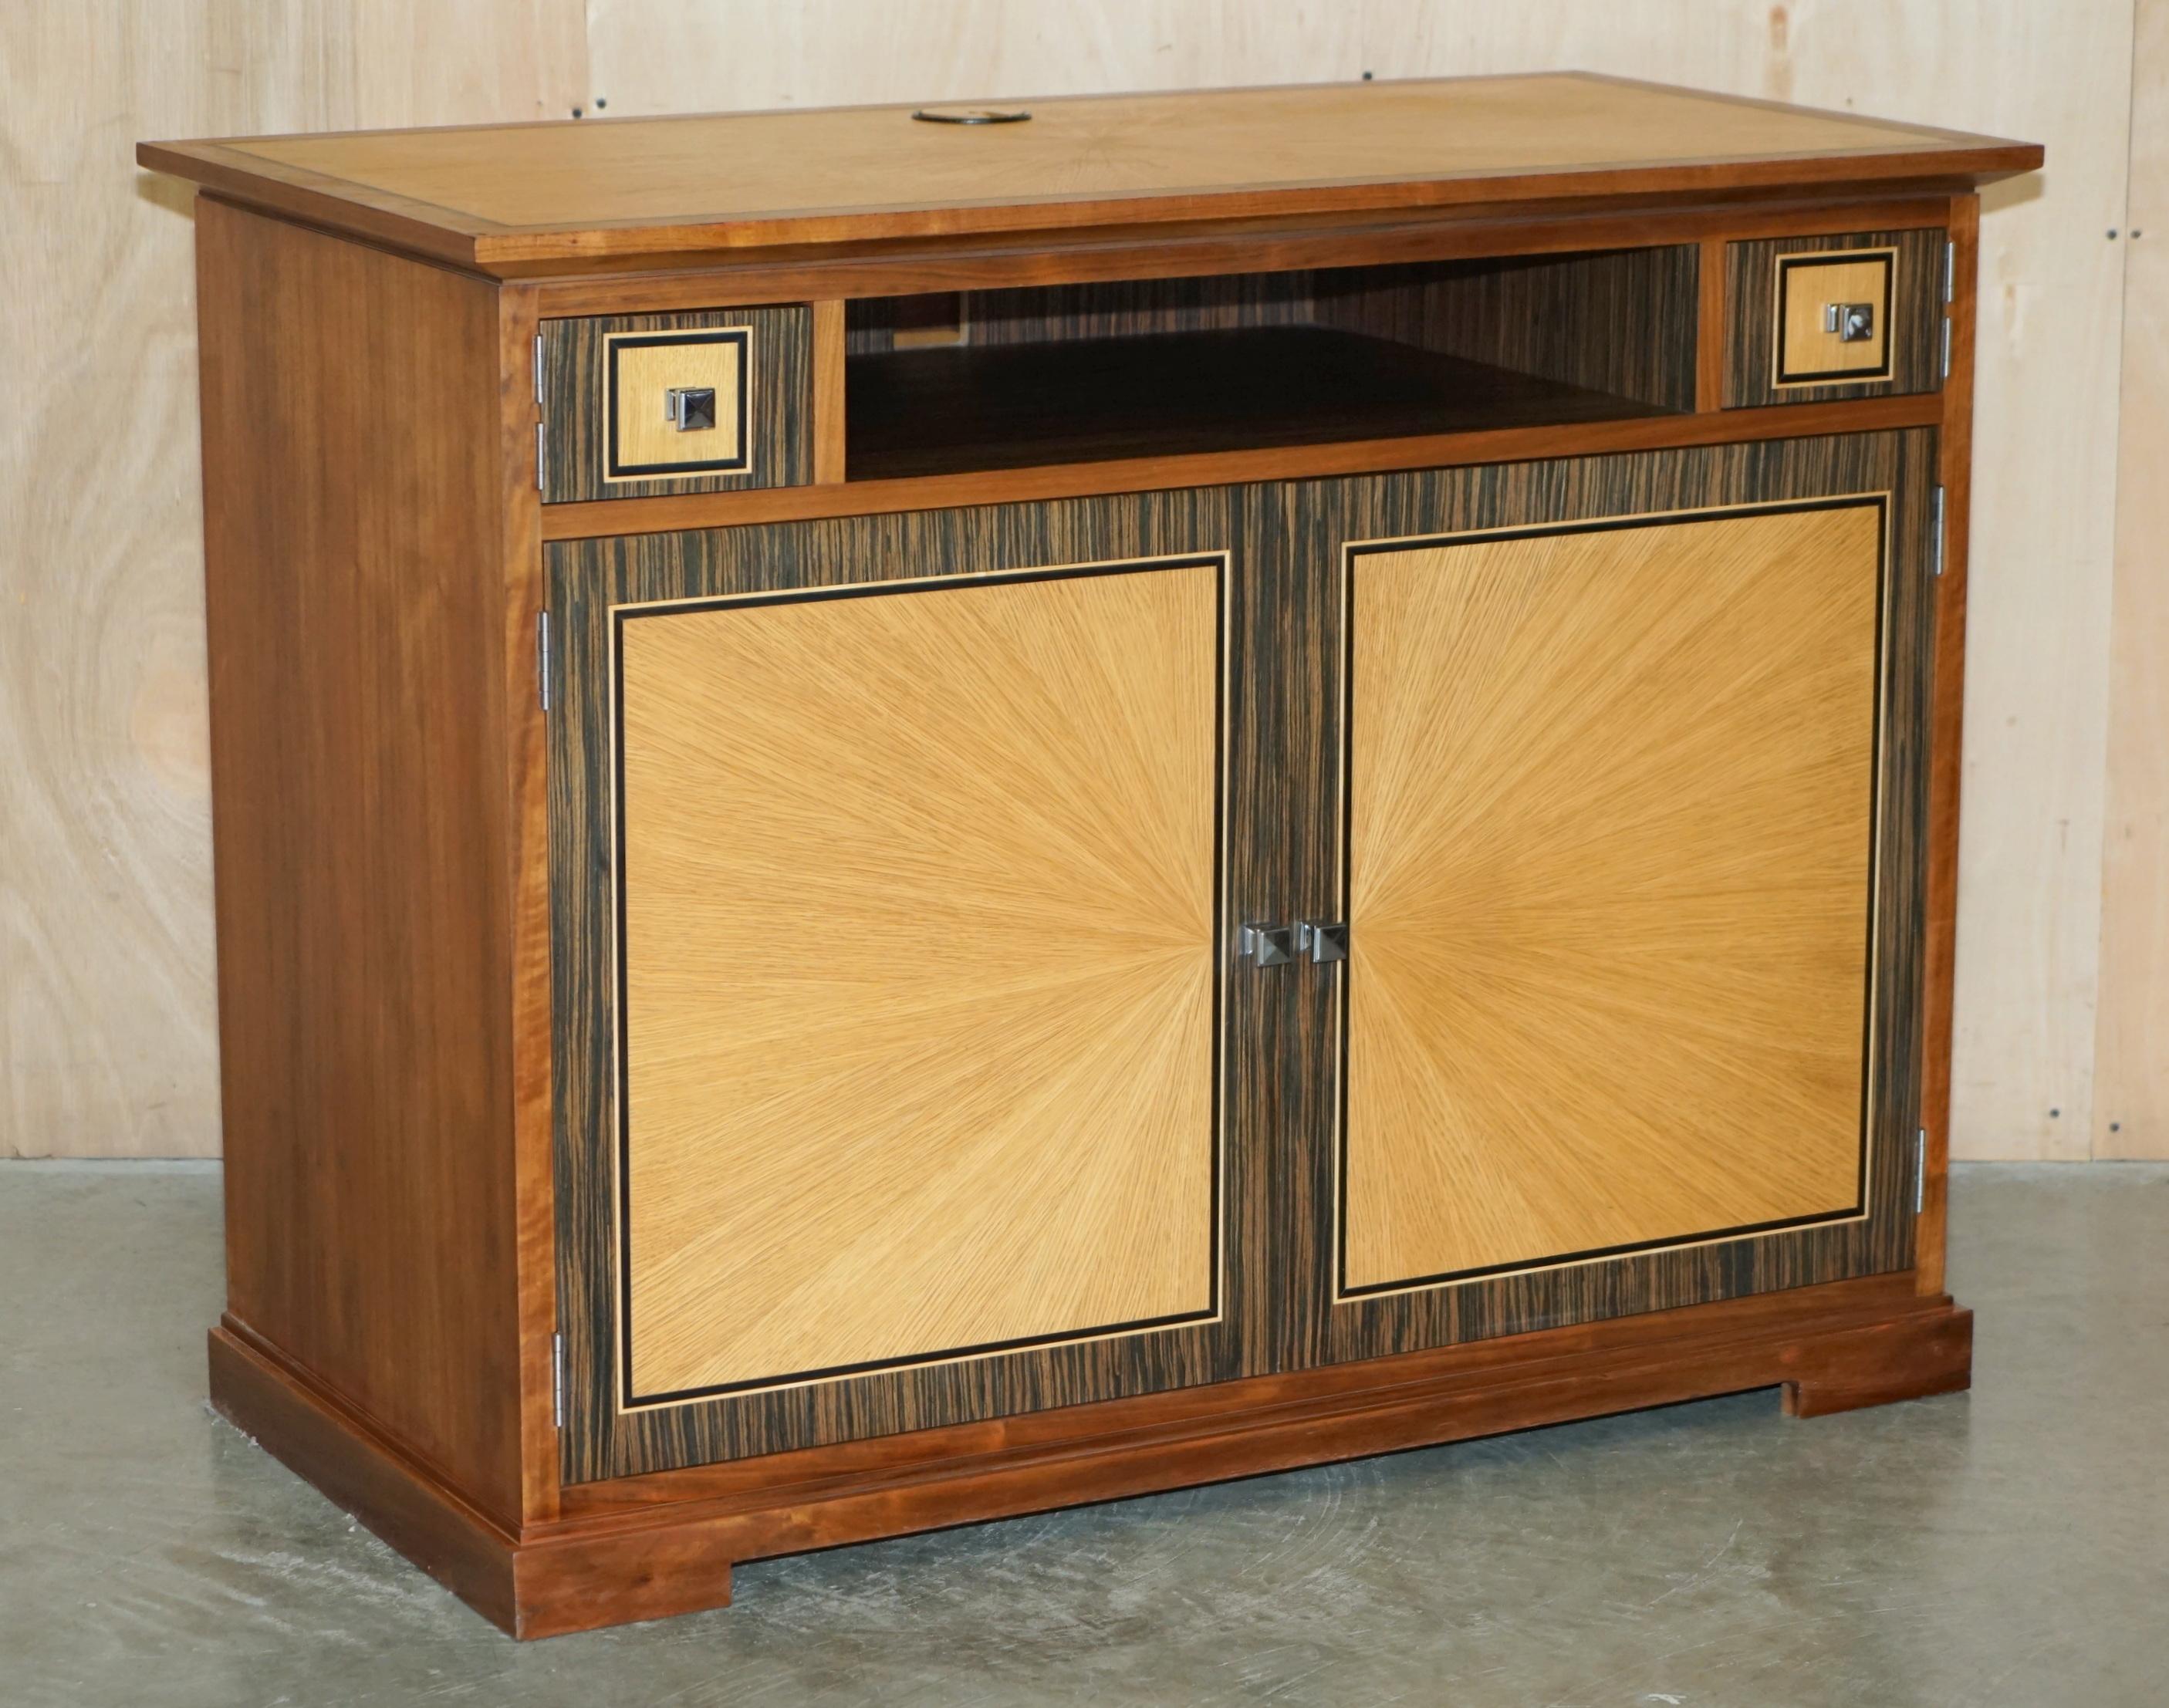 Royal House Antiques

Royal House Antiques is delighted to offer for sale this absolutely exquisite pair of Viscount David Linley Satinwood & Macassar Ebony sideboards designed to seat a television and house media boxes

Please note the delivery fee